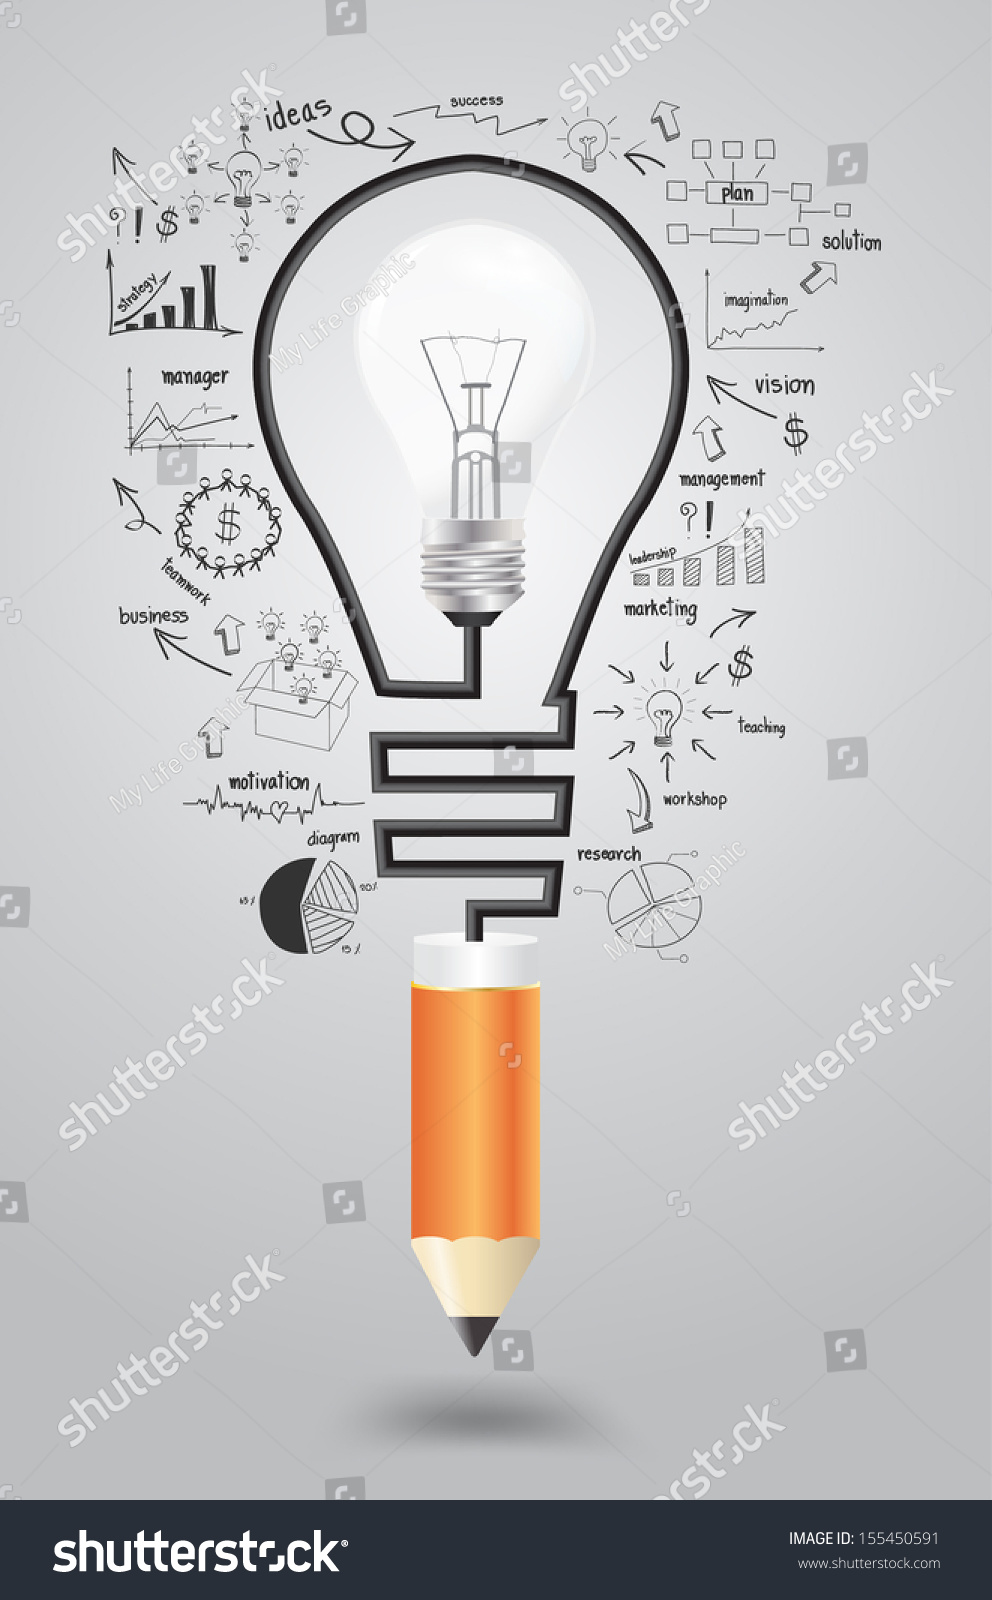 business strategy clipart - photo #44